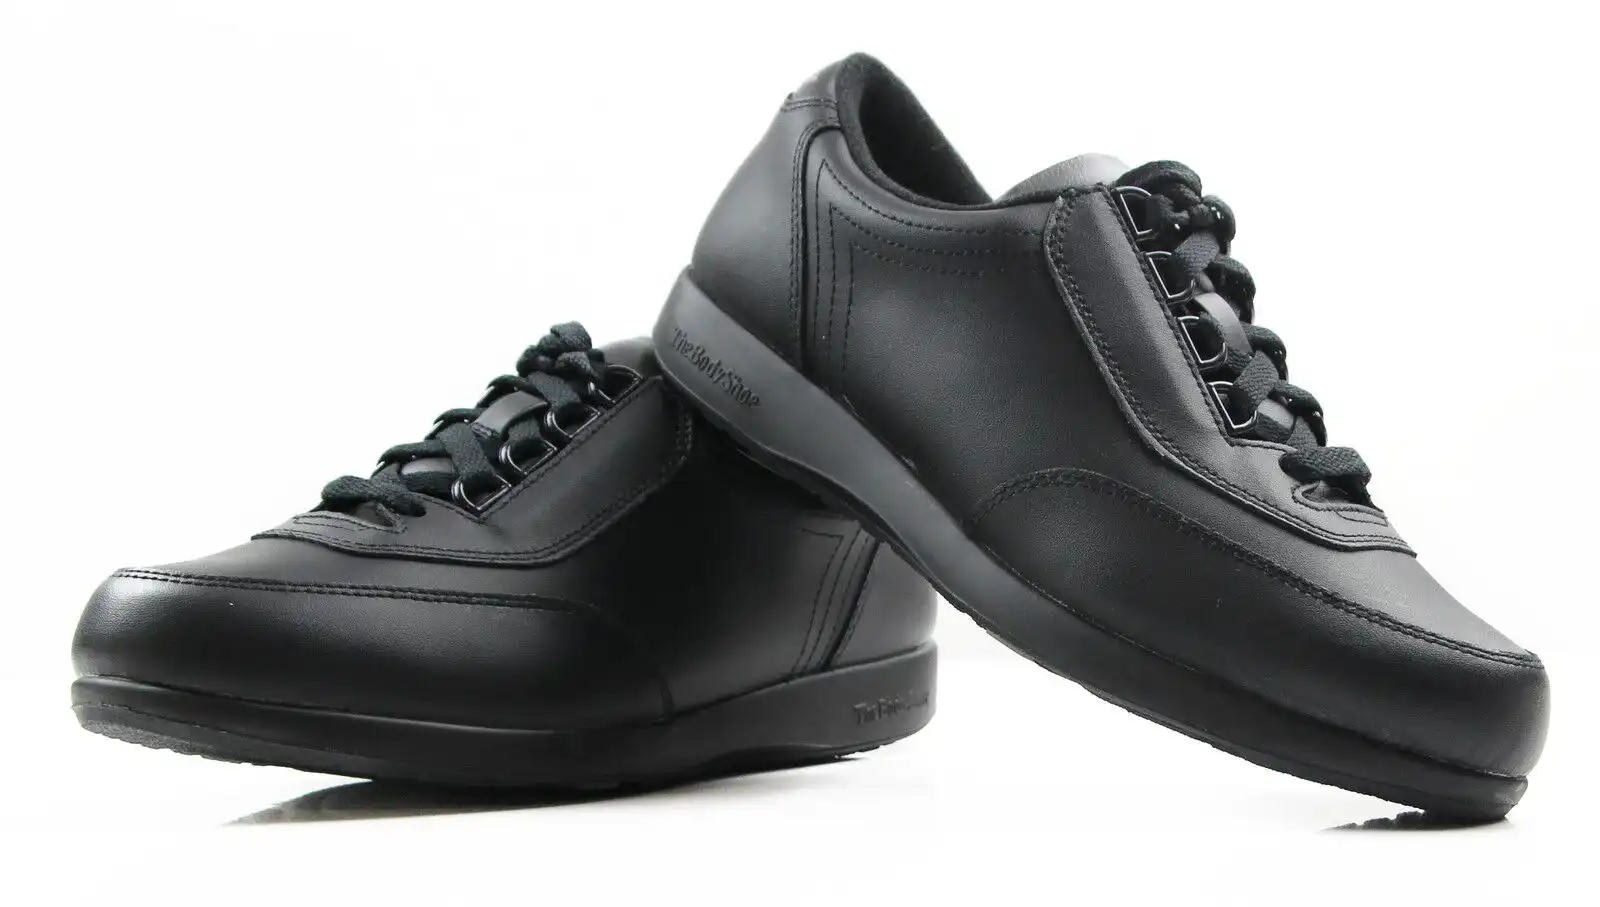 Classic Walker Hush Puppies Walking Comfortable Soft Leather Black Shoes